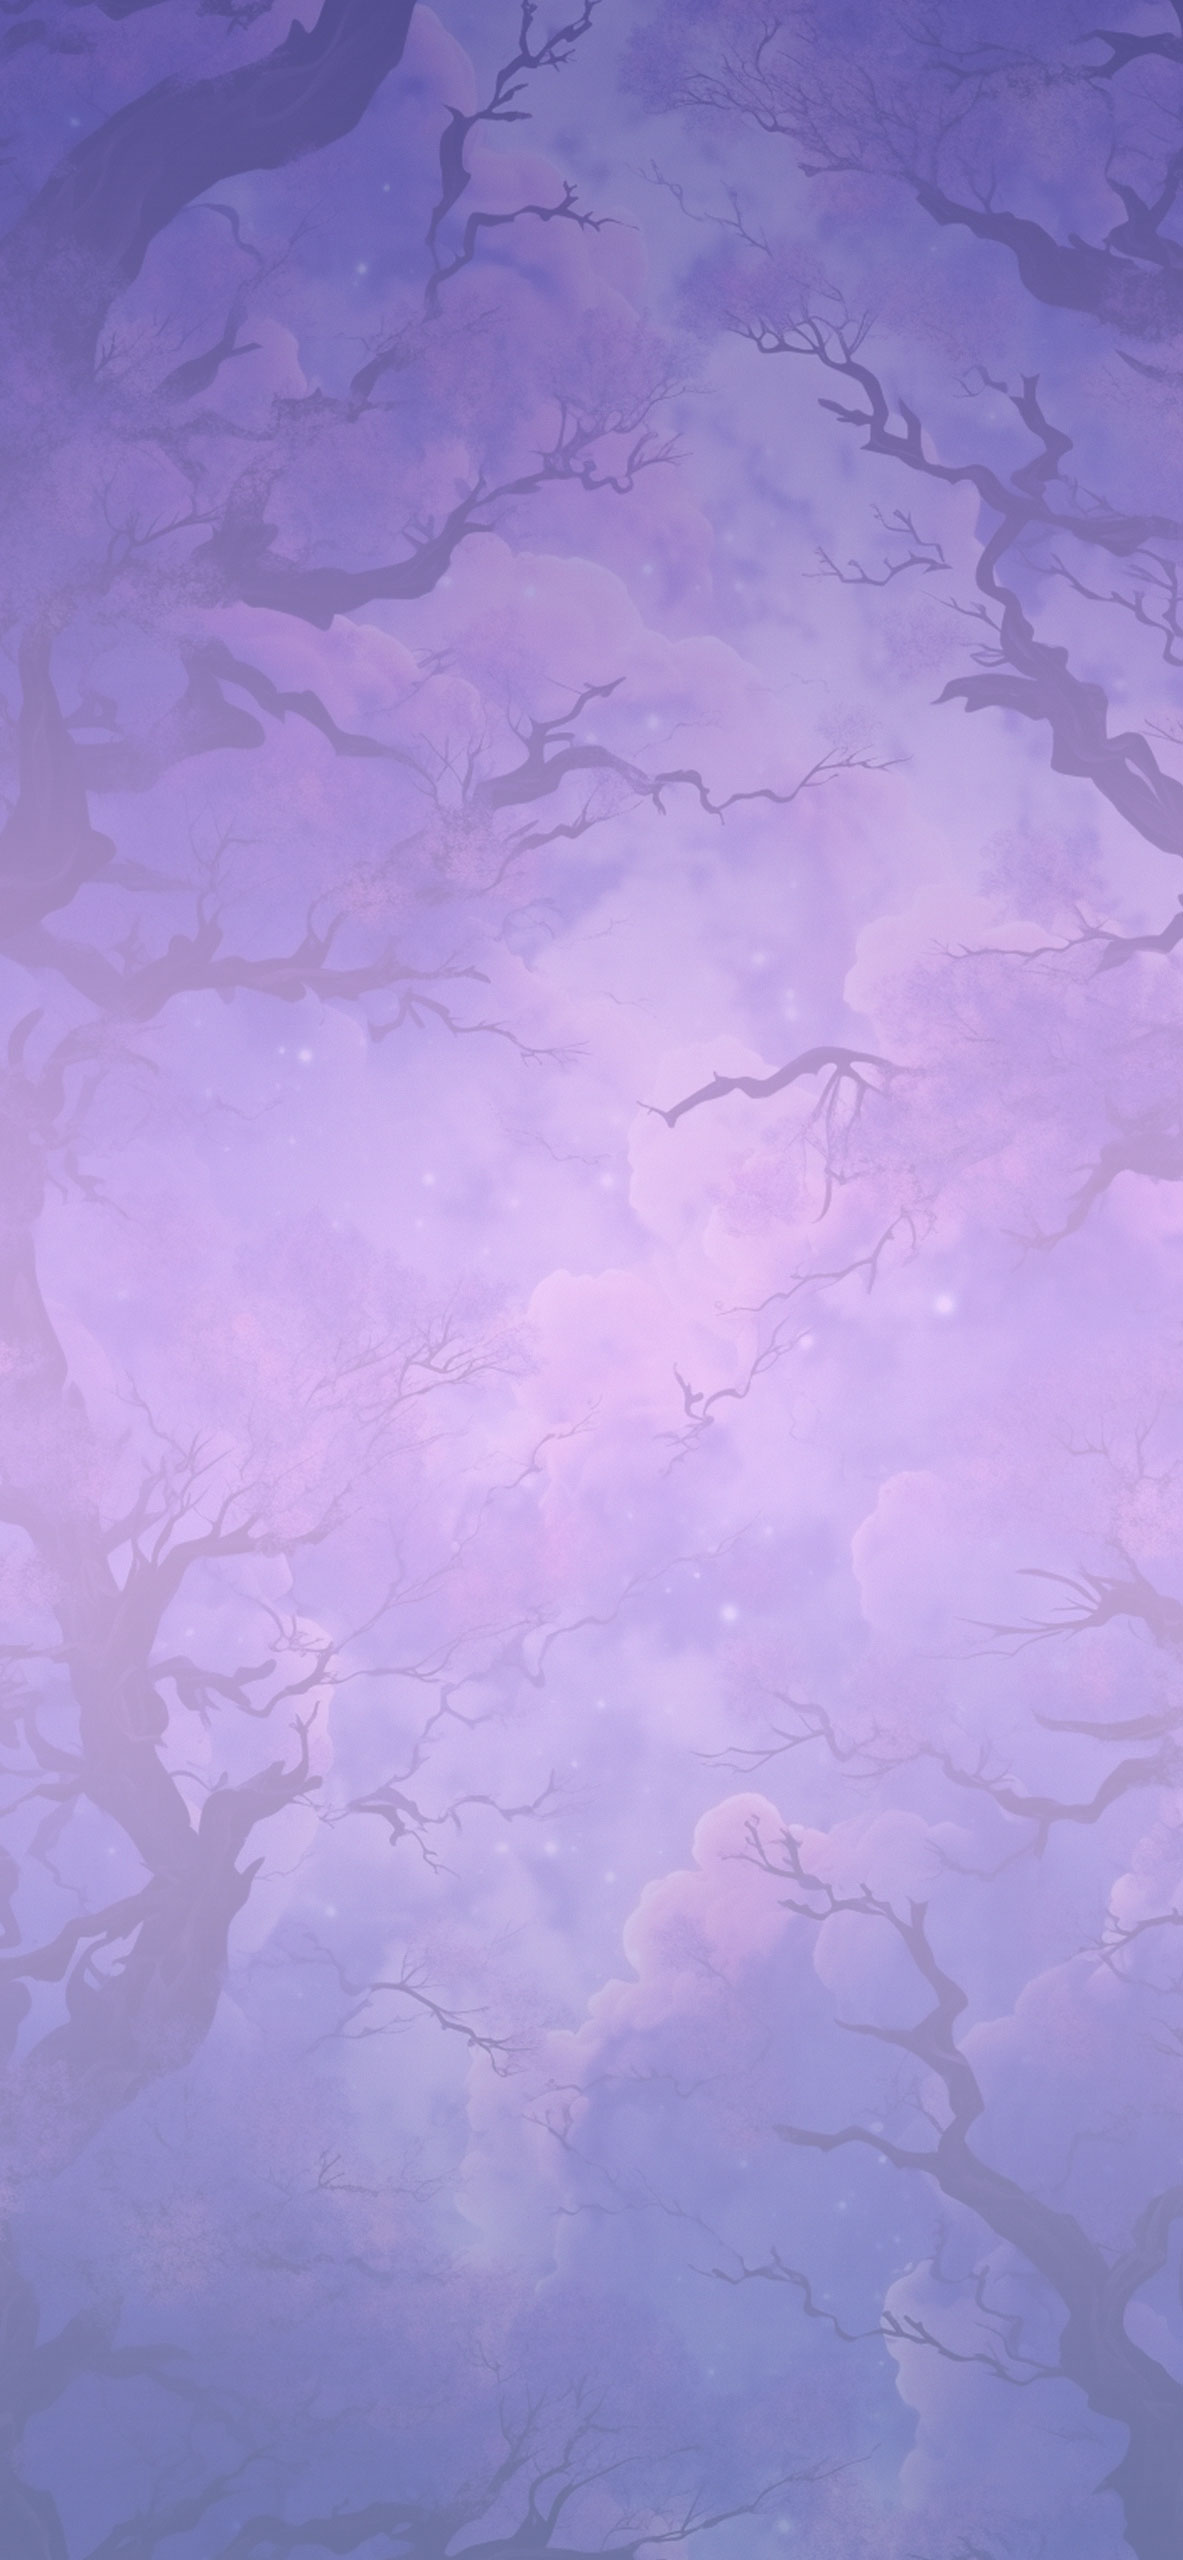 Tree & Clouds Purple Wallpaper Purple Clouds Wallpaper for iPh